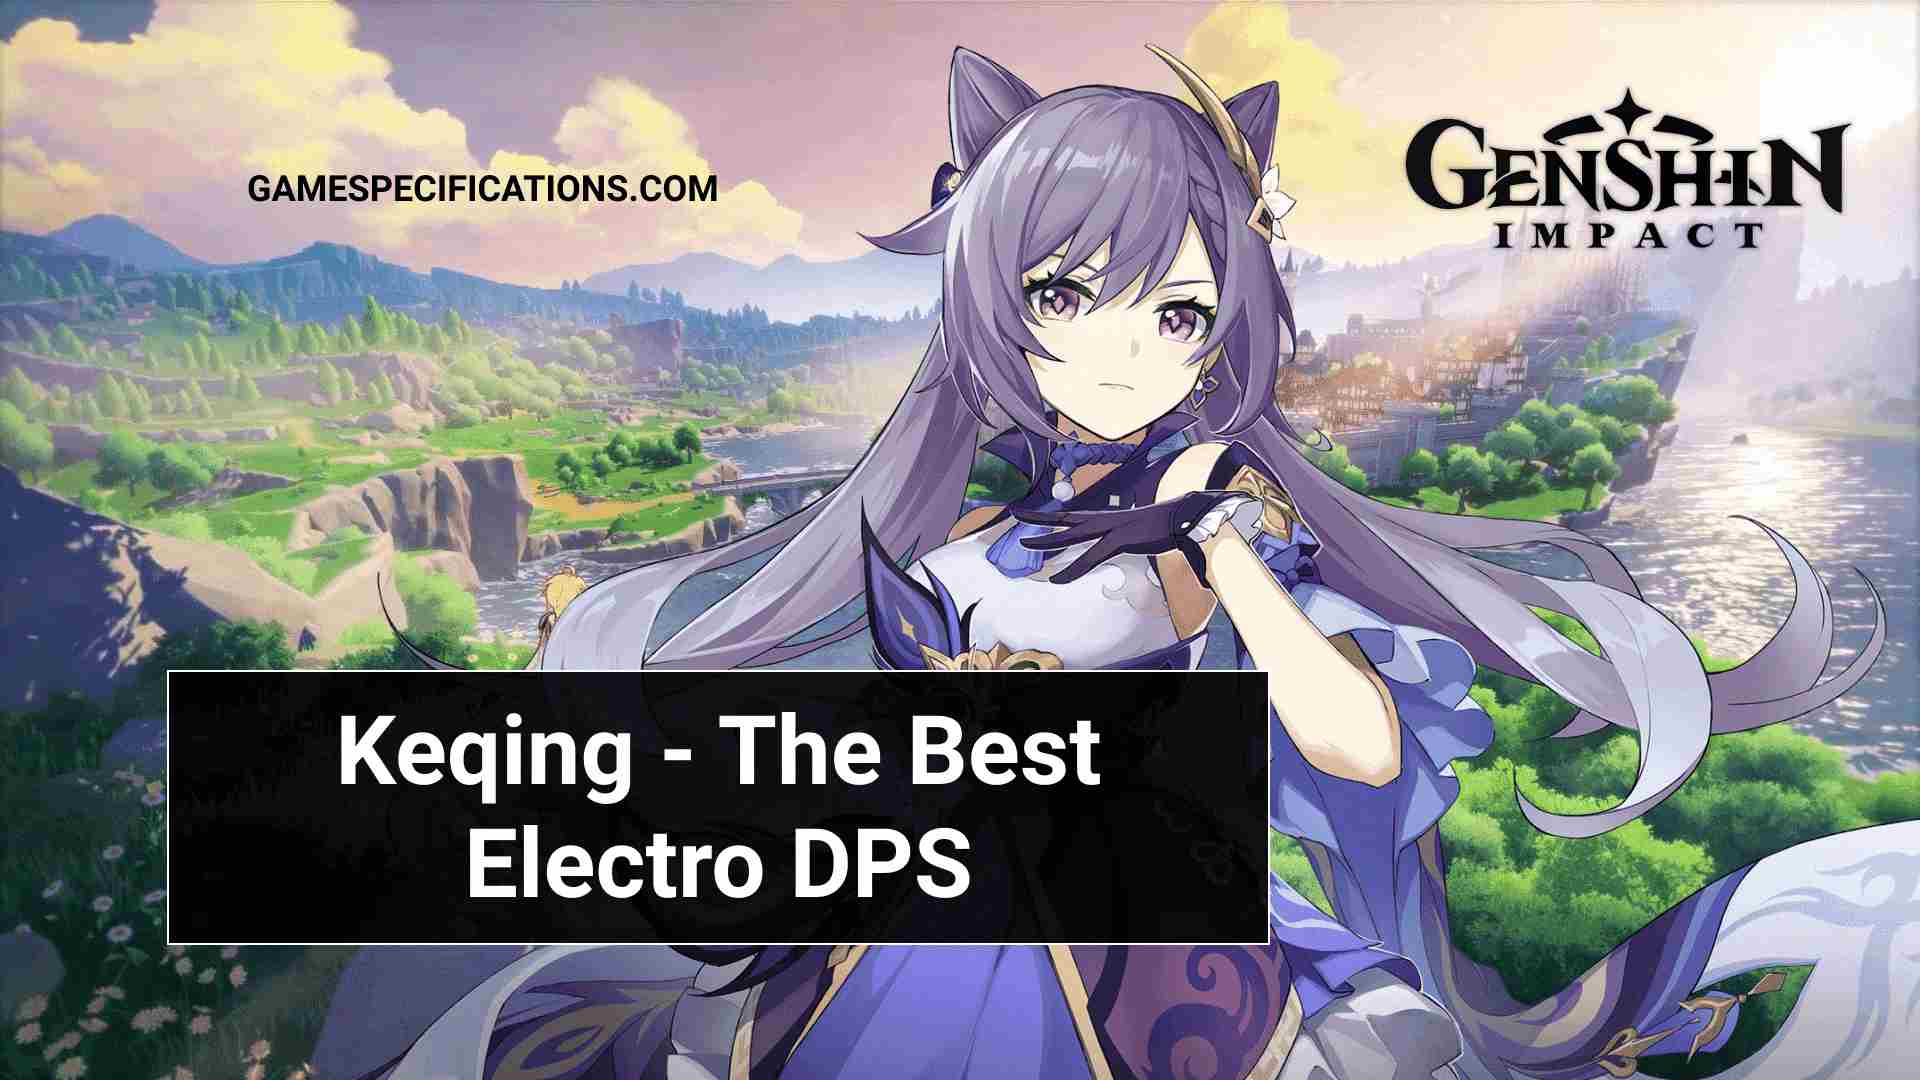 Genshin Impact Keqing - The Best Electro Character - Game Specifications